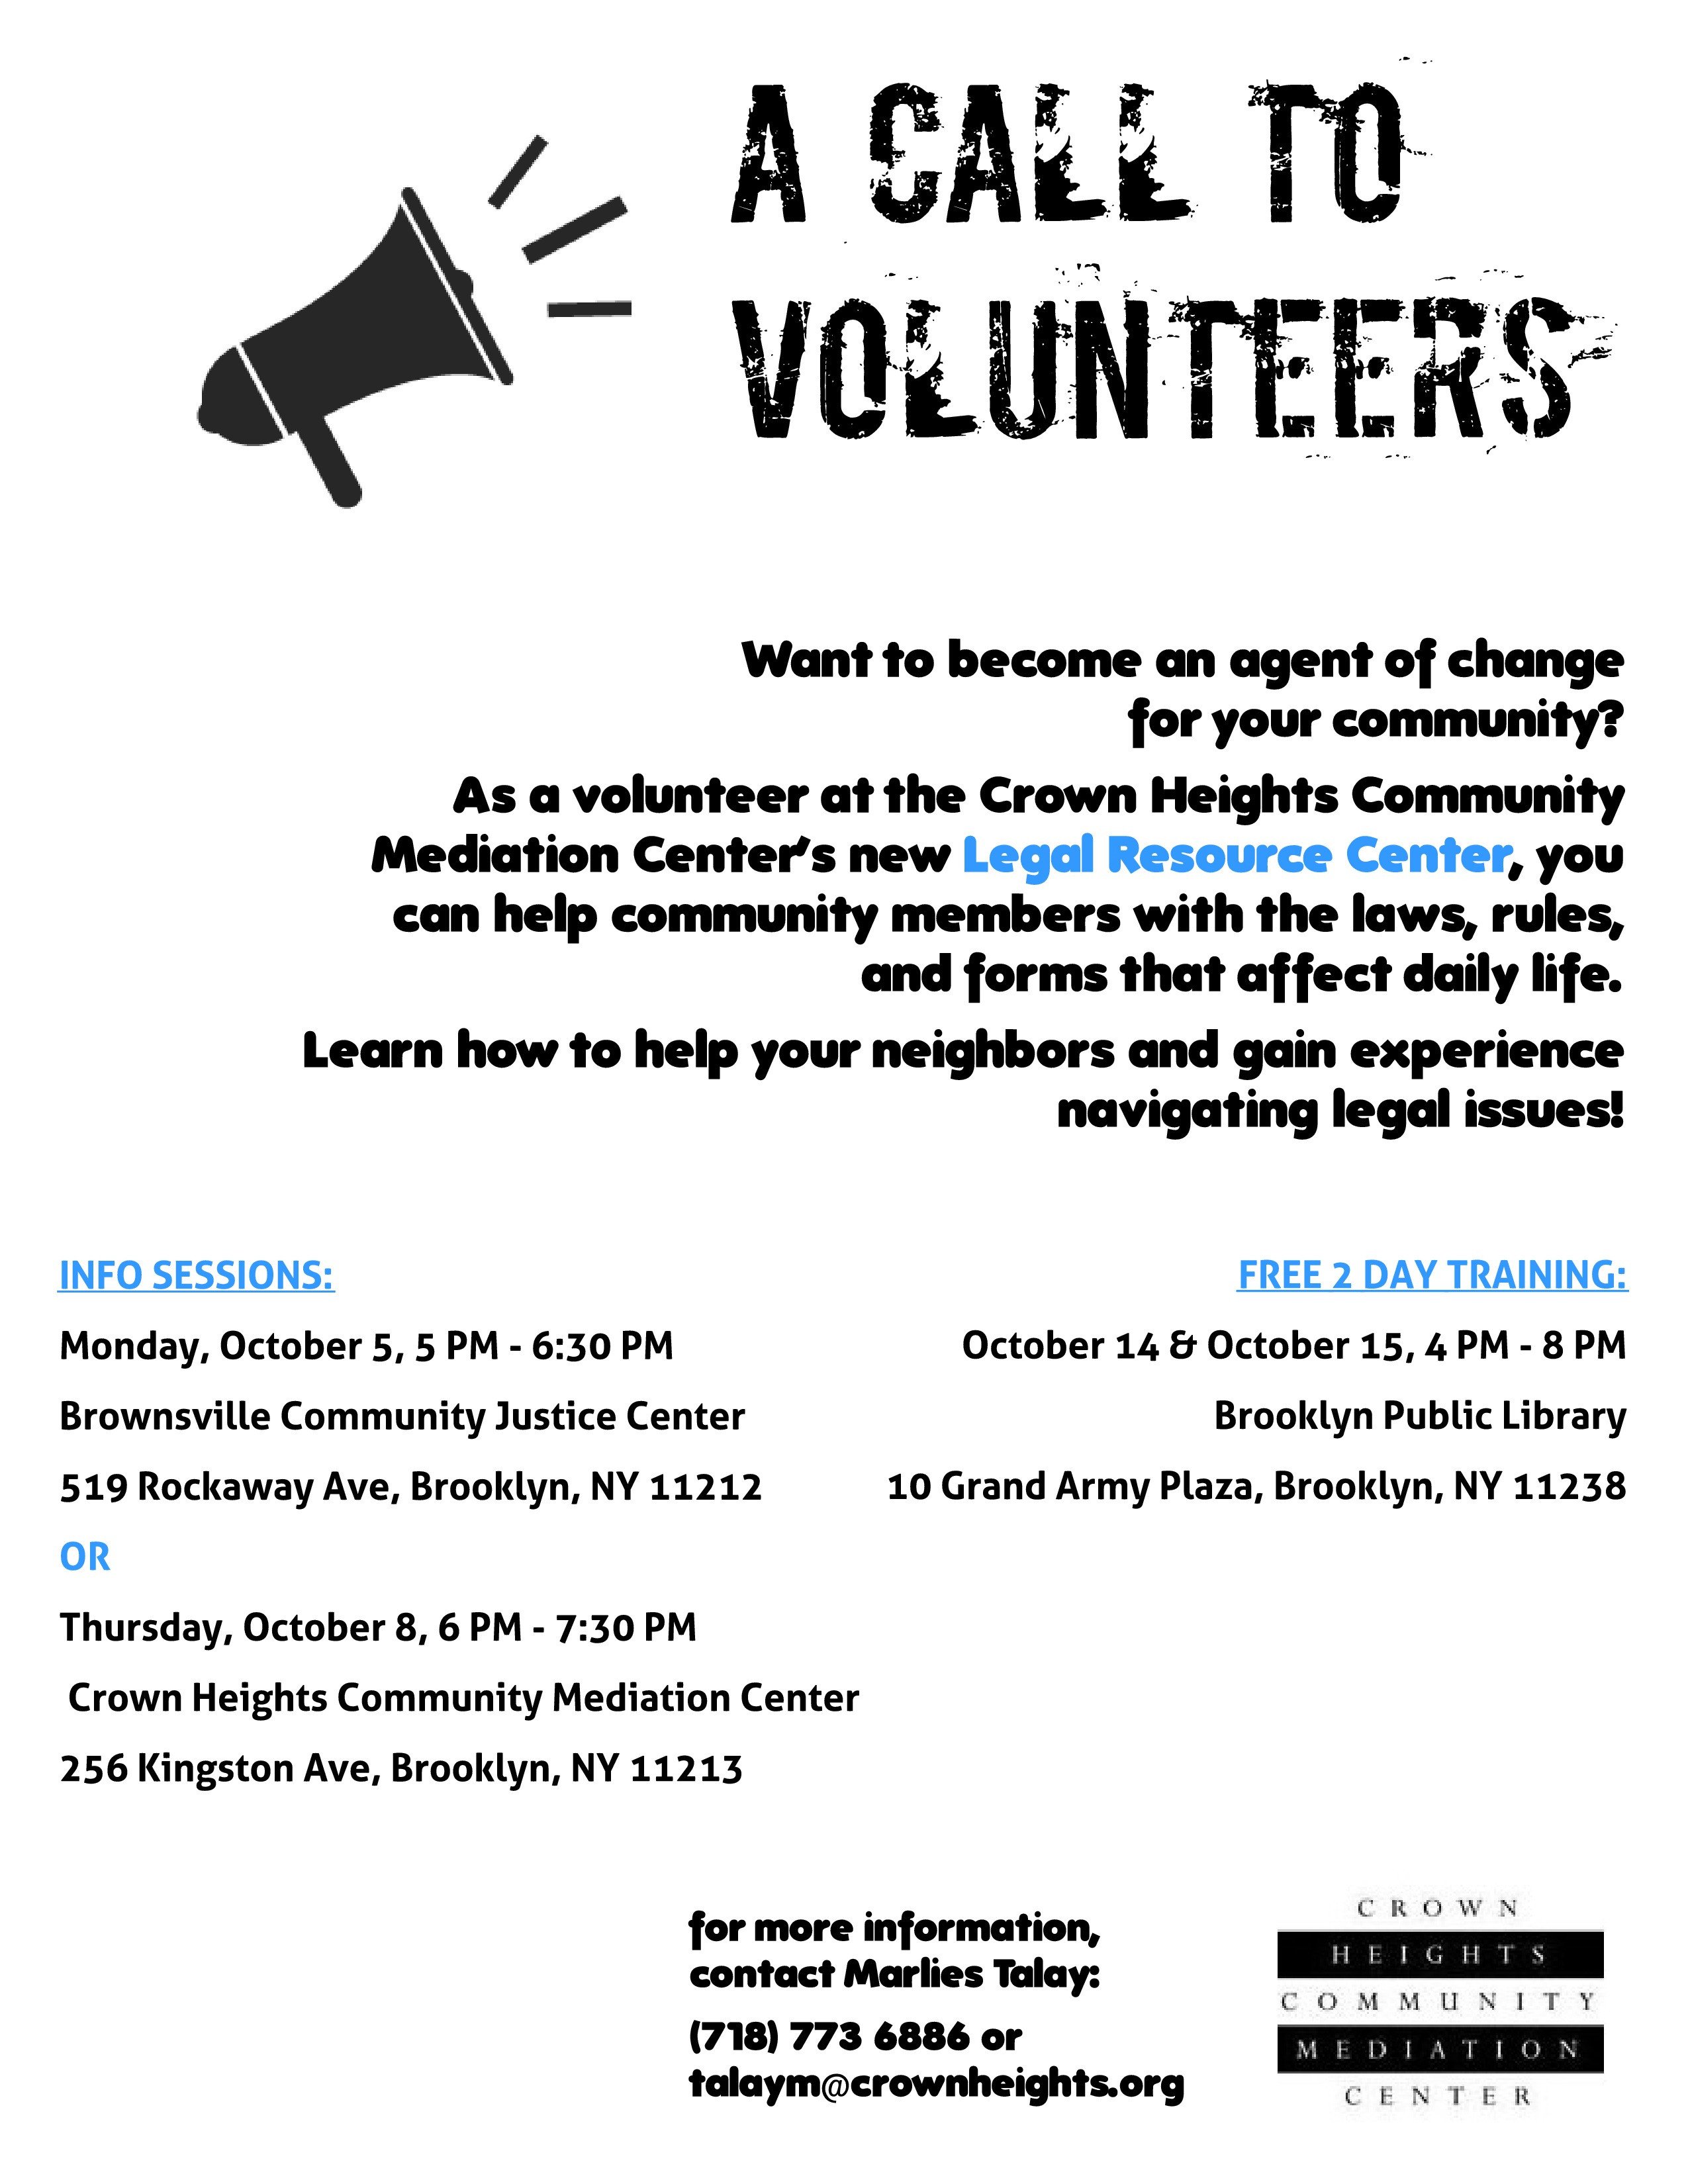 Volunteer with the Mediation Center and gain legal